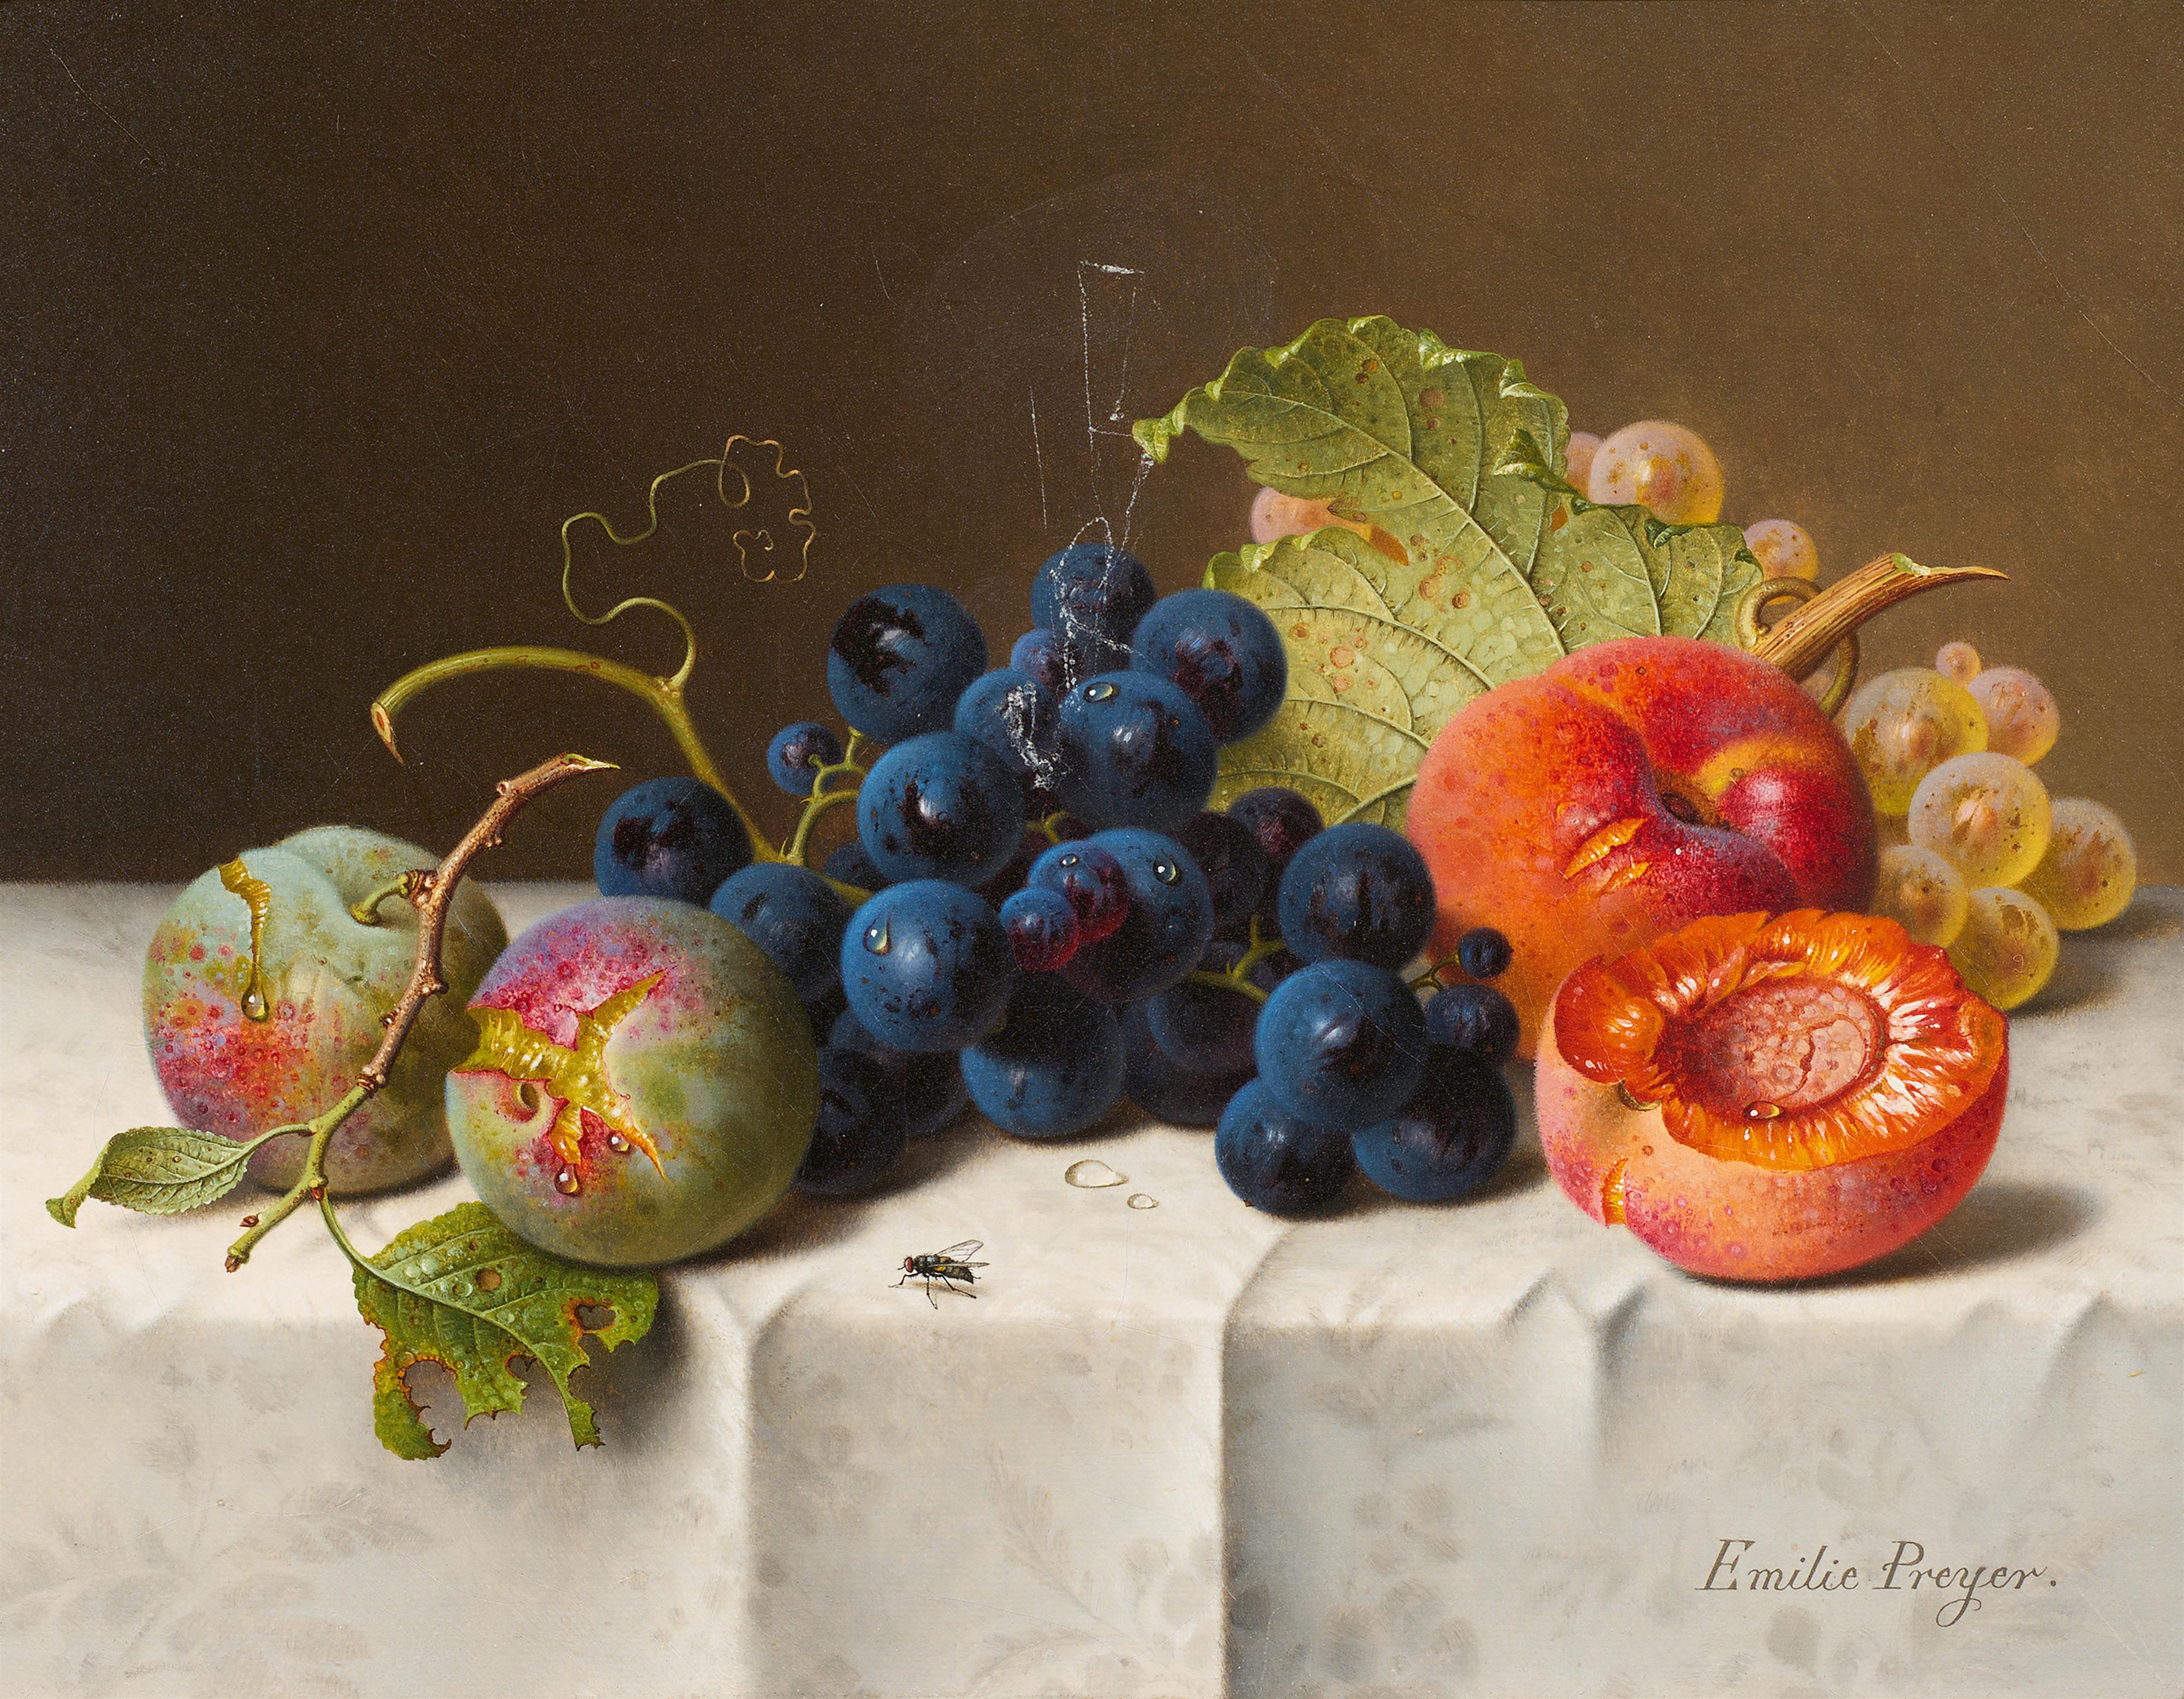 Emilie Preyer - Still Life with Plums, Grapes and Peaches on a White Tablecloth - image-1